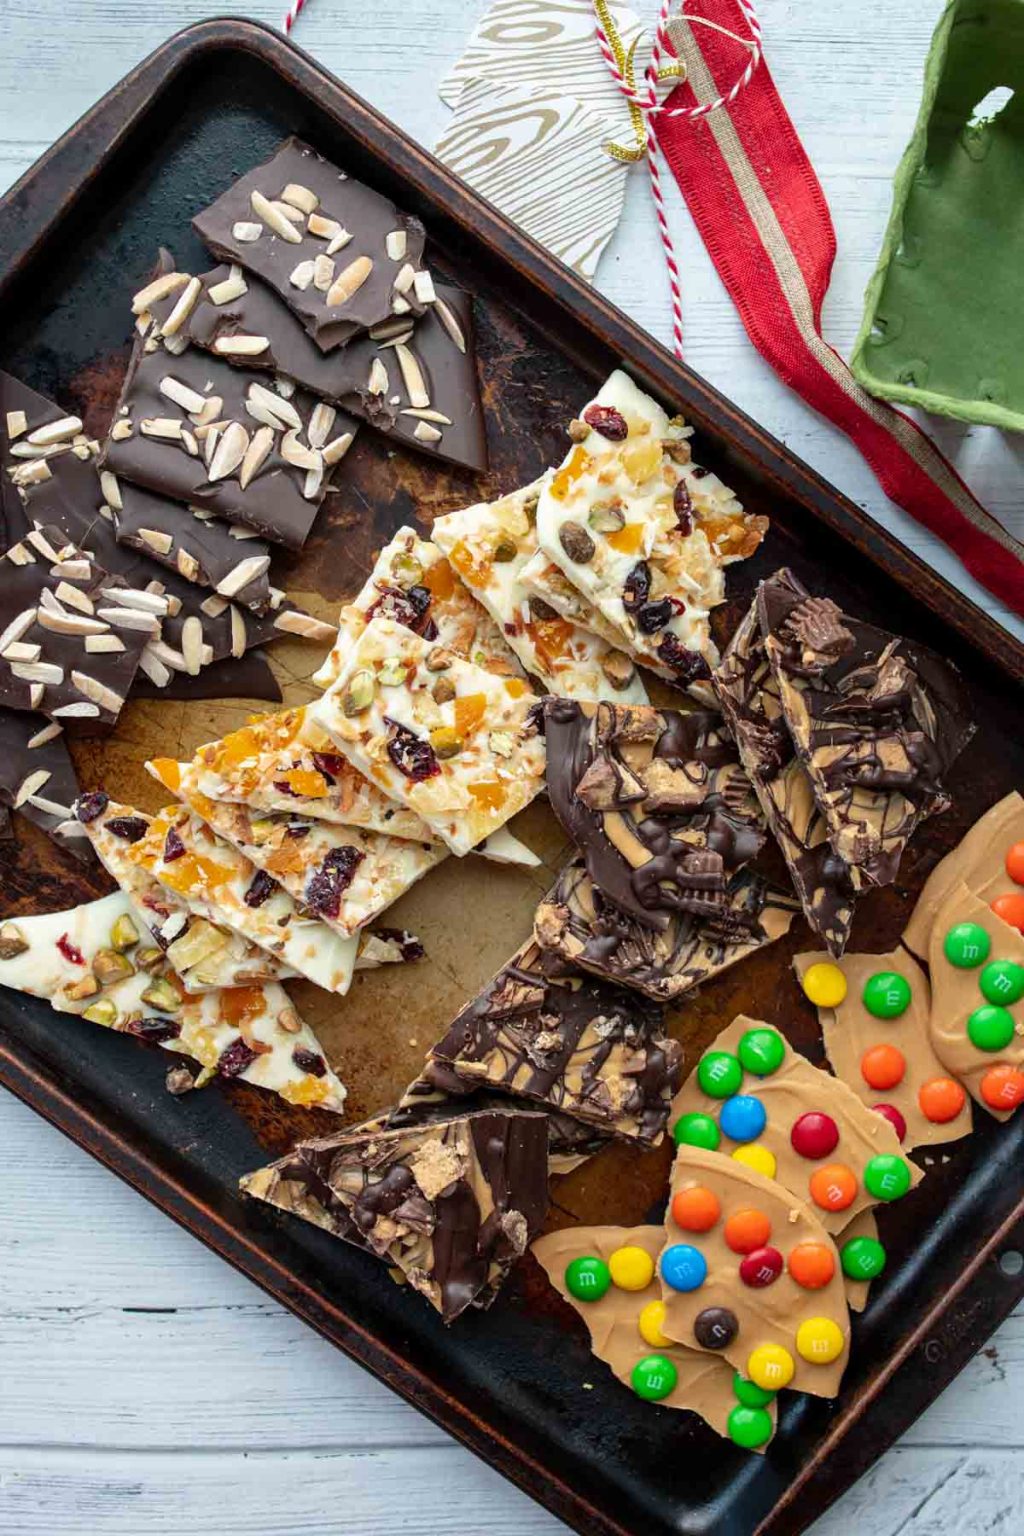 How to make chocolate covered nut bark